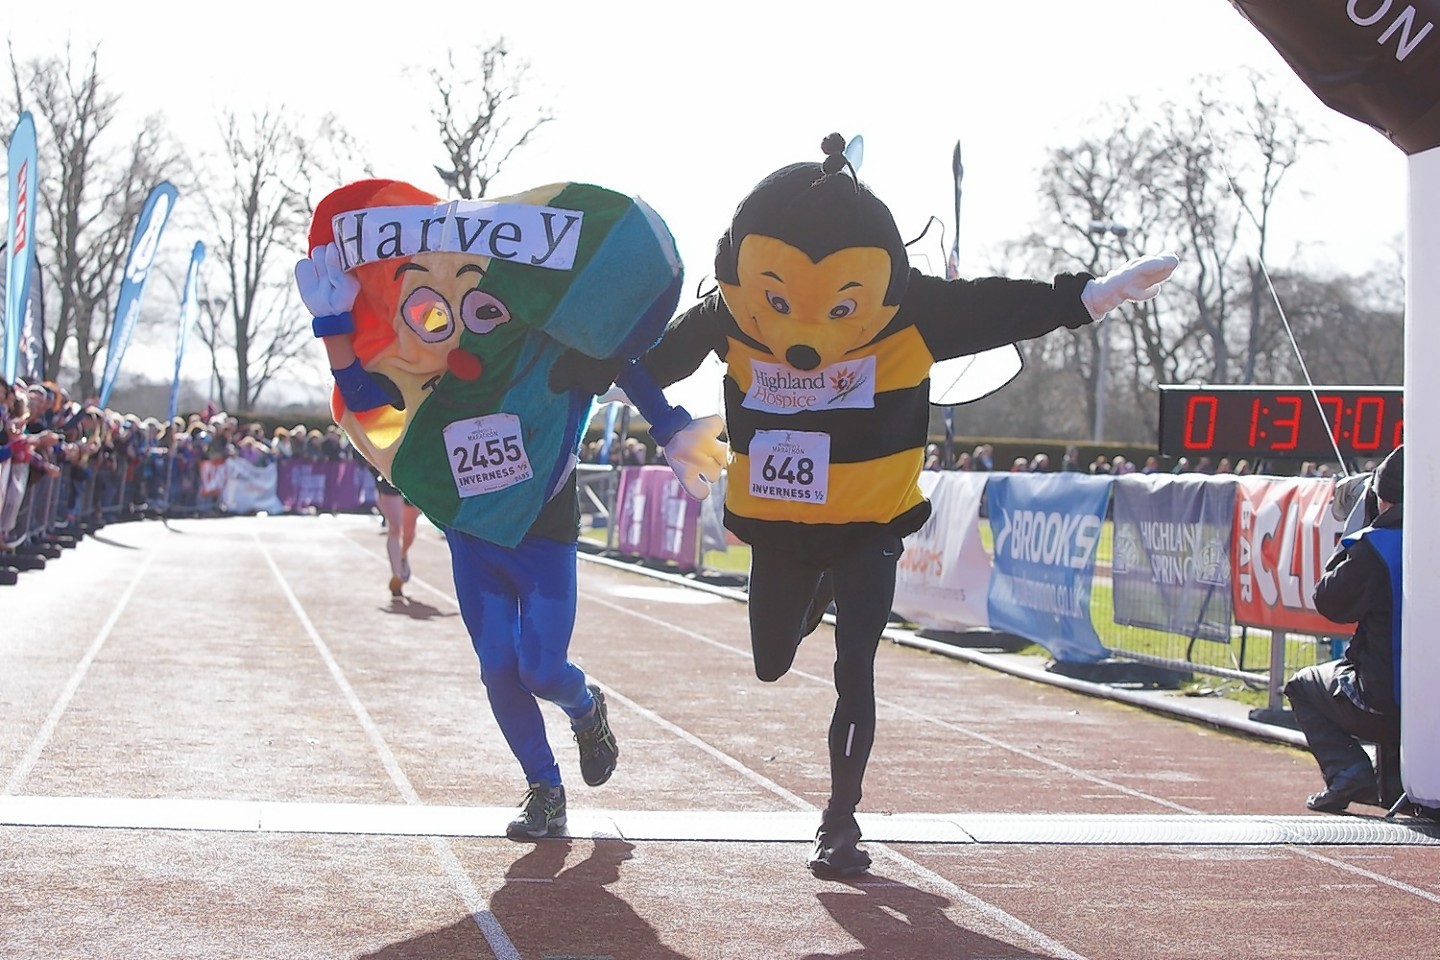 Harvet the Heart and Bobby the Bee cross the finishing line